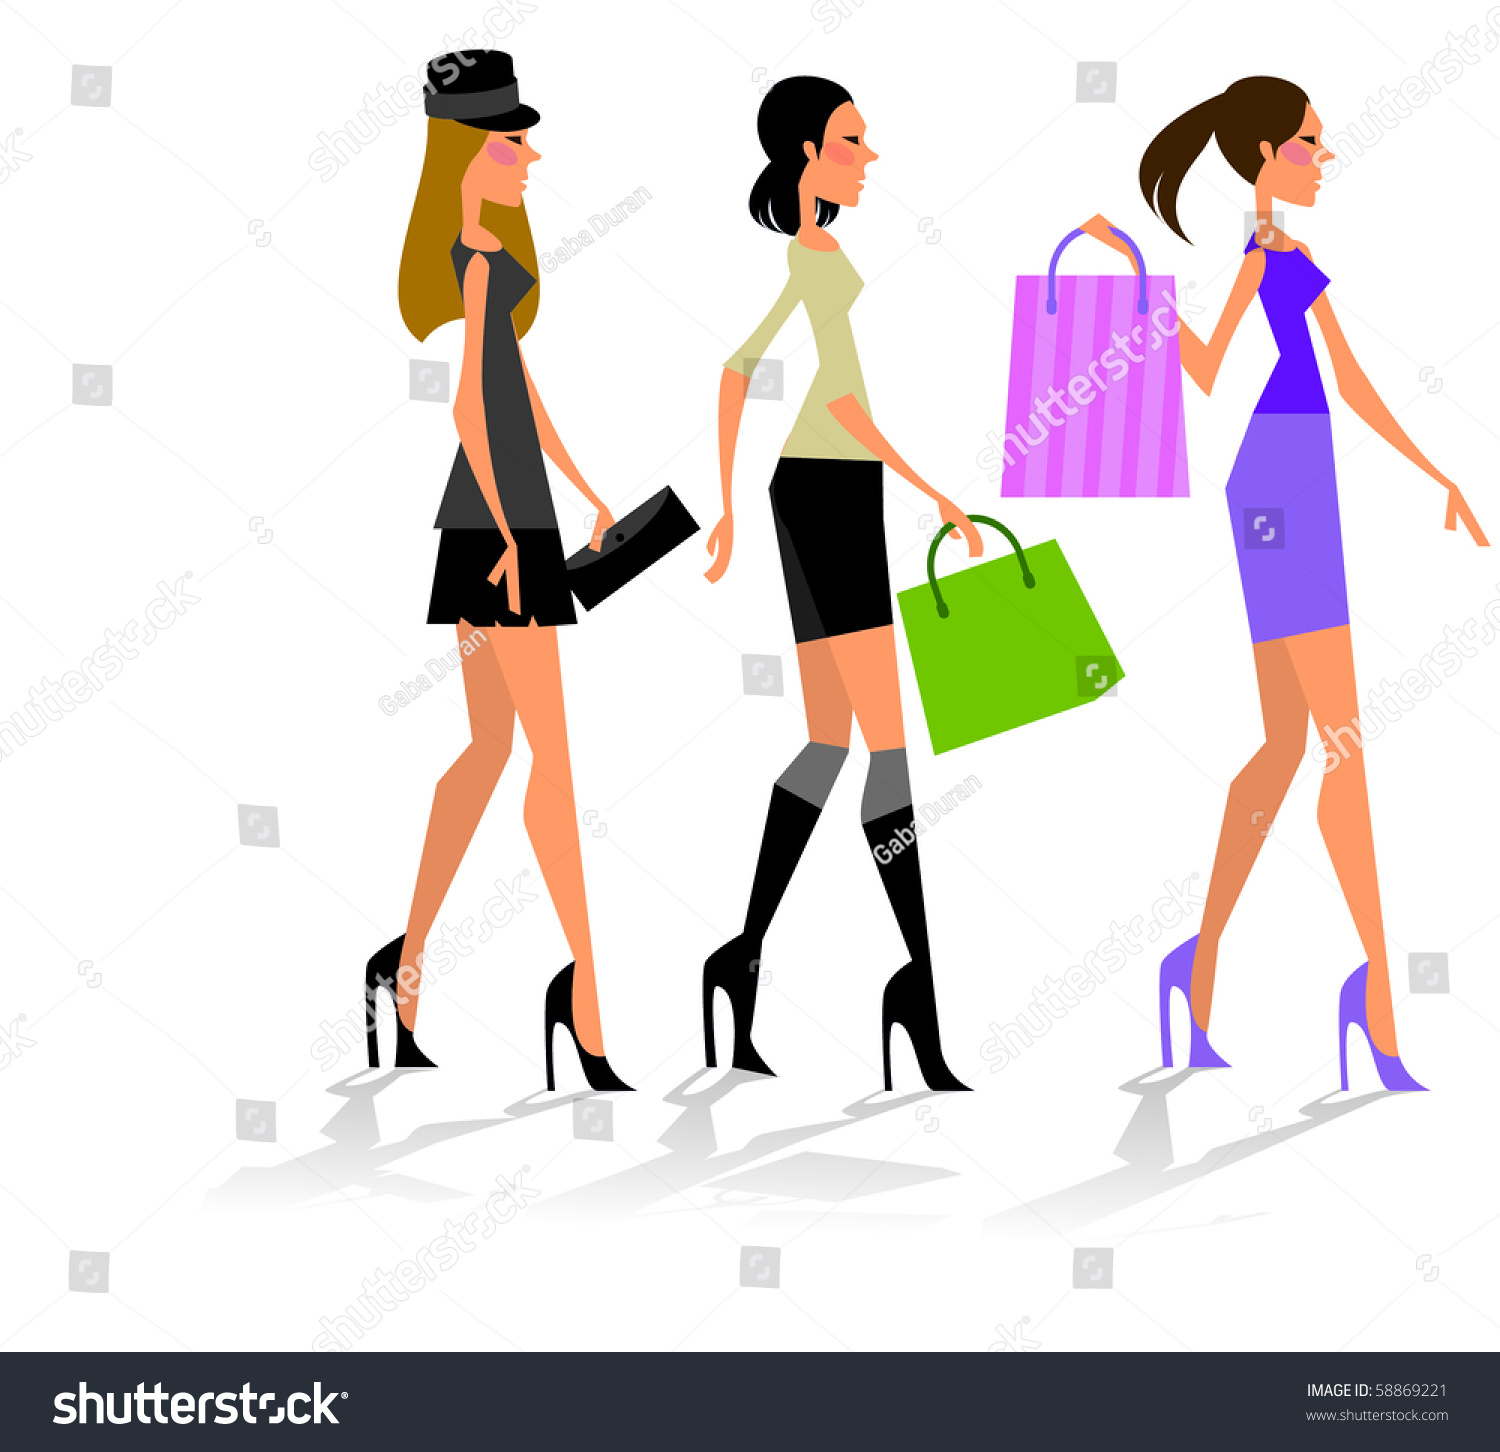 Three Fashion Girls Walking With Shopping Bags Stock Vector ...